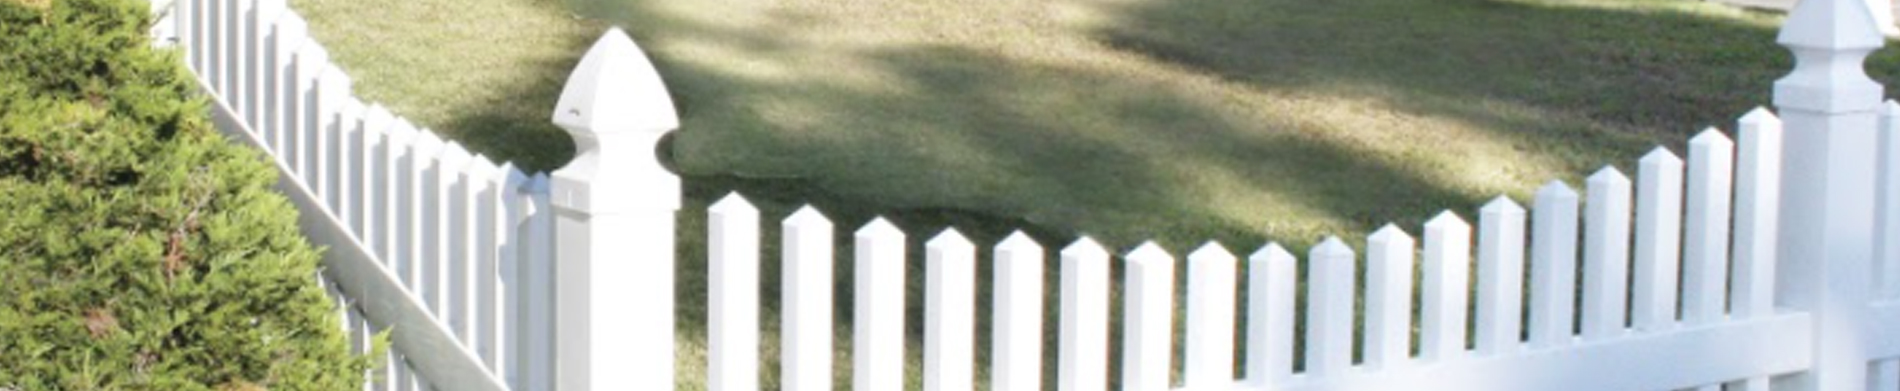 Install the Duramax USA made vinyl fence in your backyard, which is worth envying